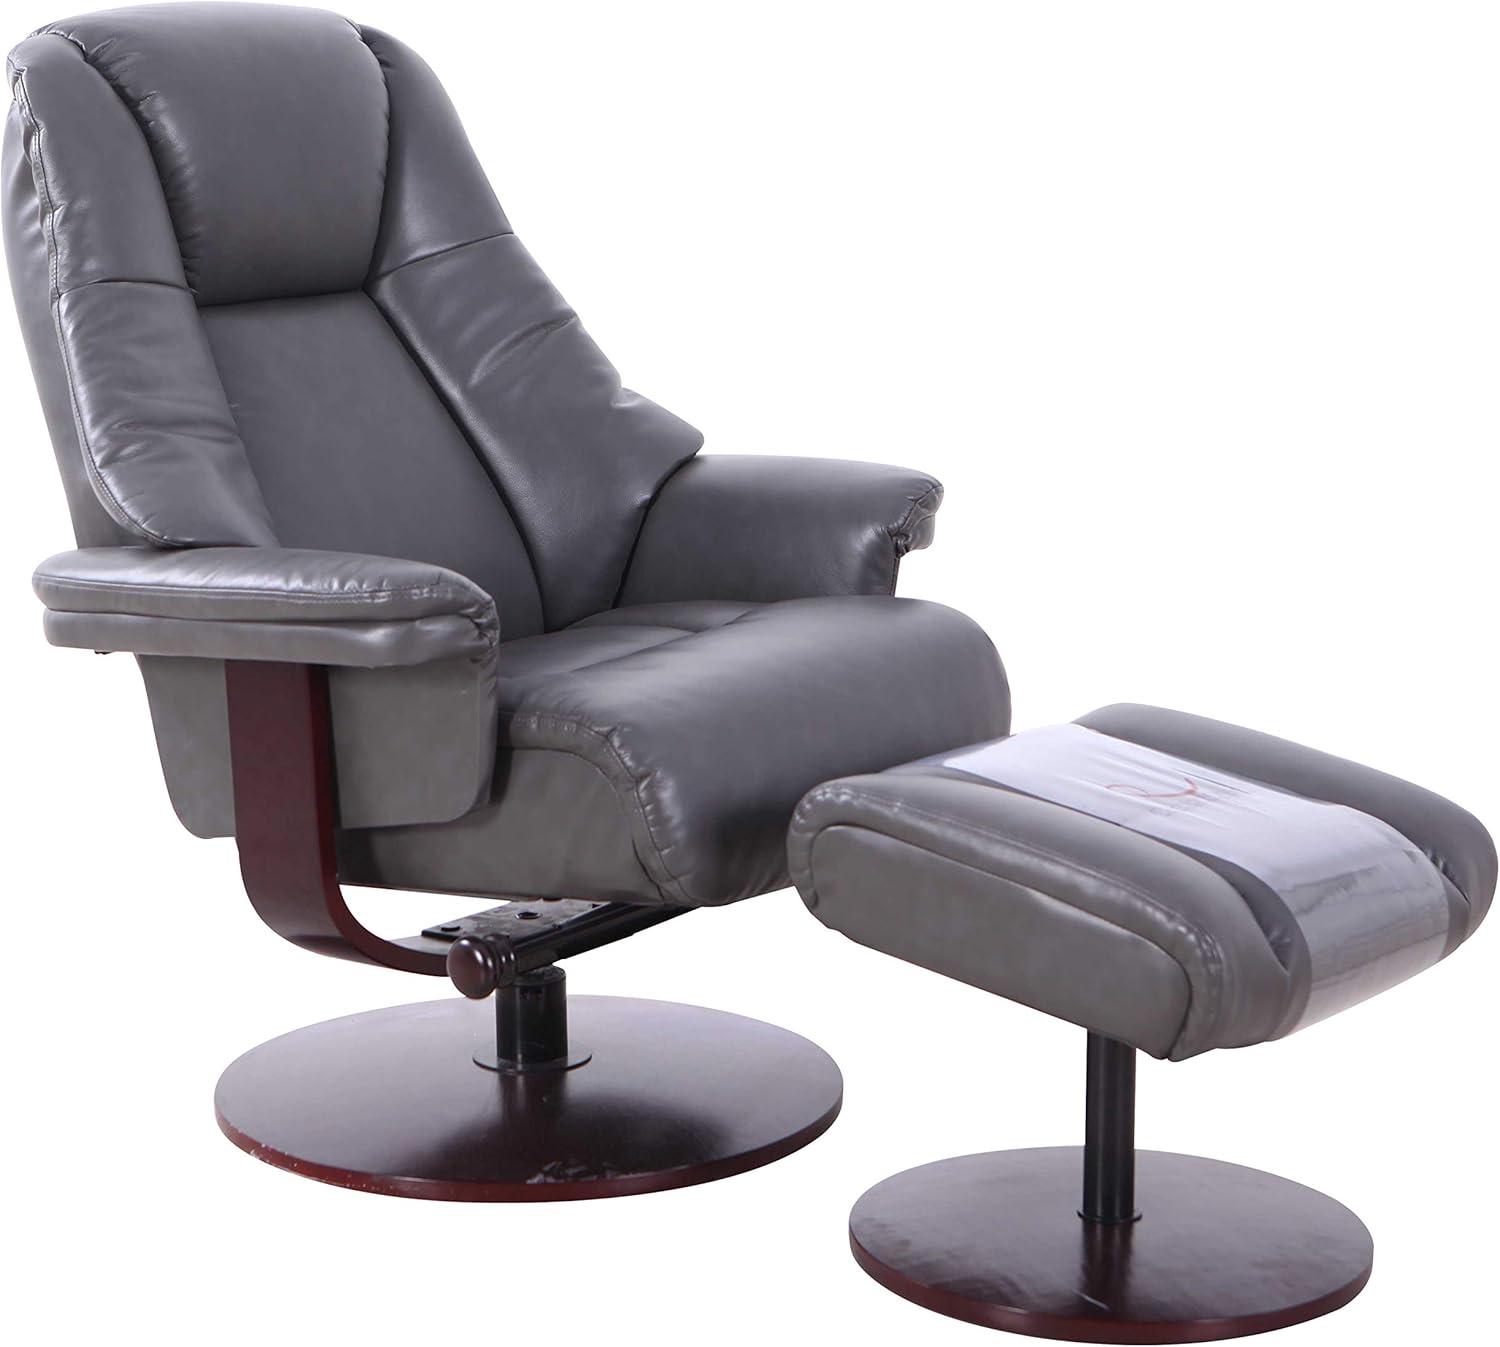 Transitional Charcoal Leather Swivel Recliner with Wood Accents